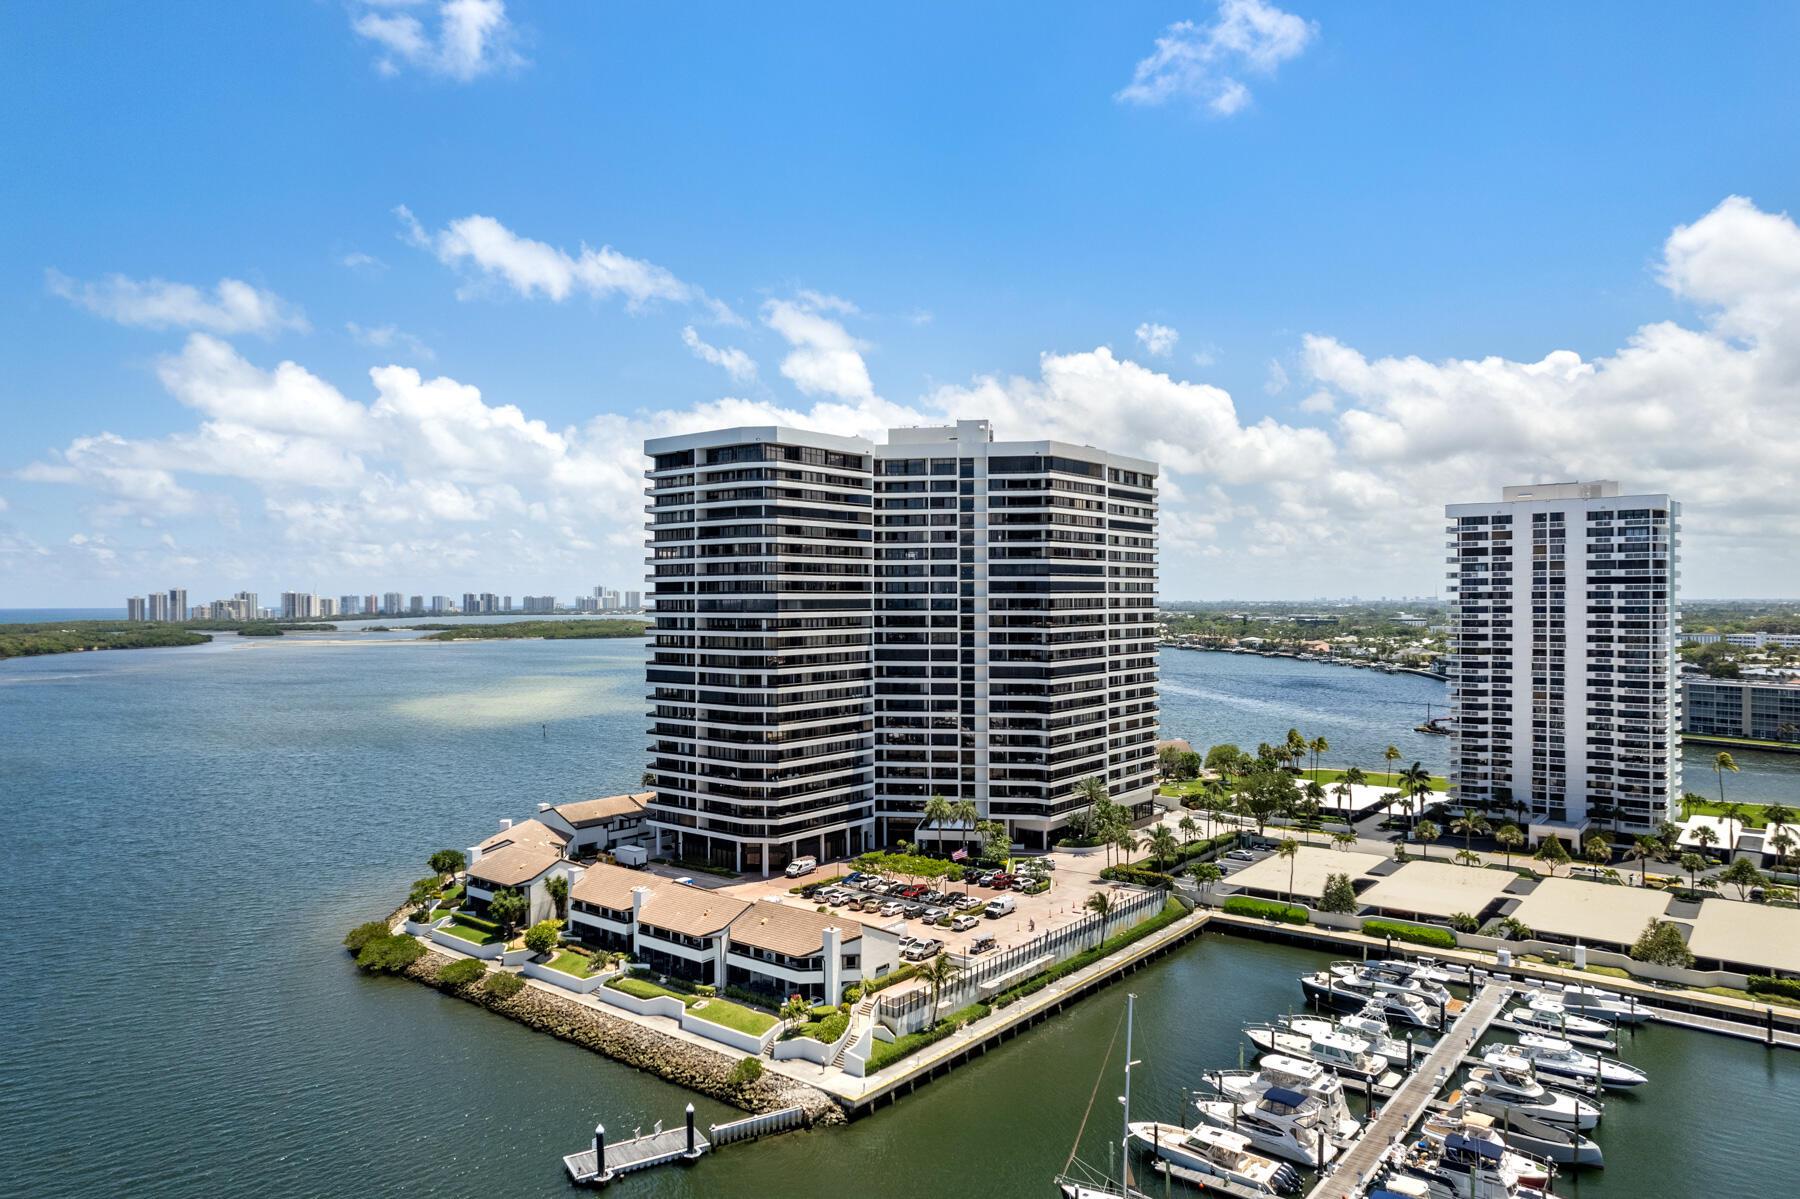 OLD PORT COVE PENTHOUSE RARE OPPERTUNITY to acquire a SUPURB view and location in a contemporary North Palm Beach building. Sizzling view of ocean and wide intracoastal waterway with southeast exposure. Large split 2 bedroom design allows for a 9X8 convenient/stylish in-home office. Live outside on an unusually large 12. foot deep and 21-foot-long balcony, This residence has 10'8'' ceilings with complete laundry room, travertine floors throughout, Subzero and Thermador appliances, wood cabinets and granite counter tops, extra storage, garage parking and MORE! Common areas are in the process of being updated. The 2 mile marina/ intracoastal walkway allows an easy walk to an onsite waterfront restaurant and bar.Old Port Cove is located conveniently in the center of everything.